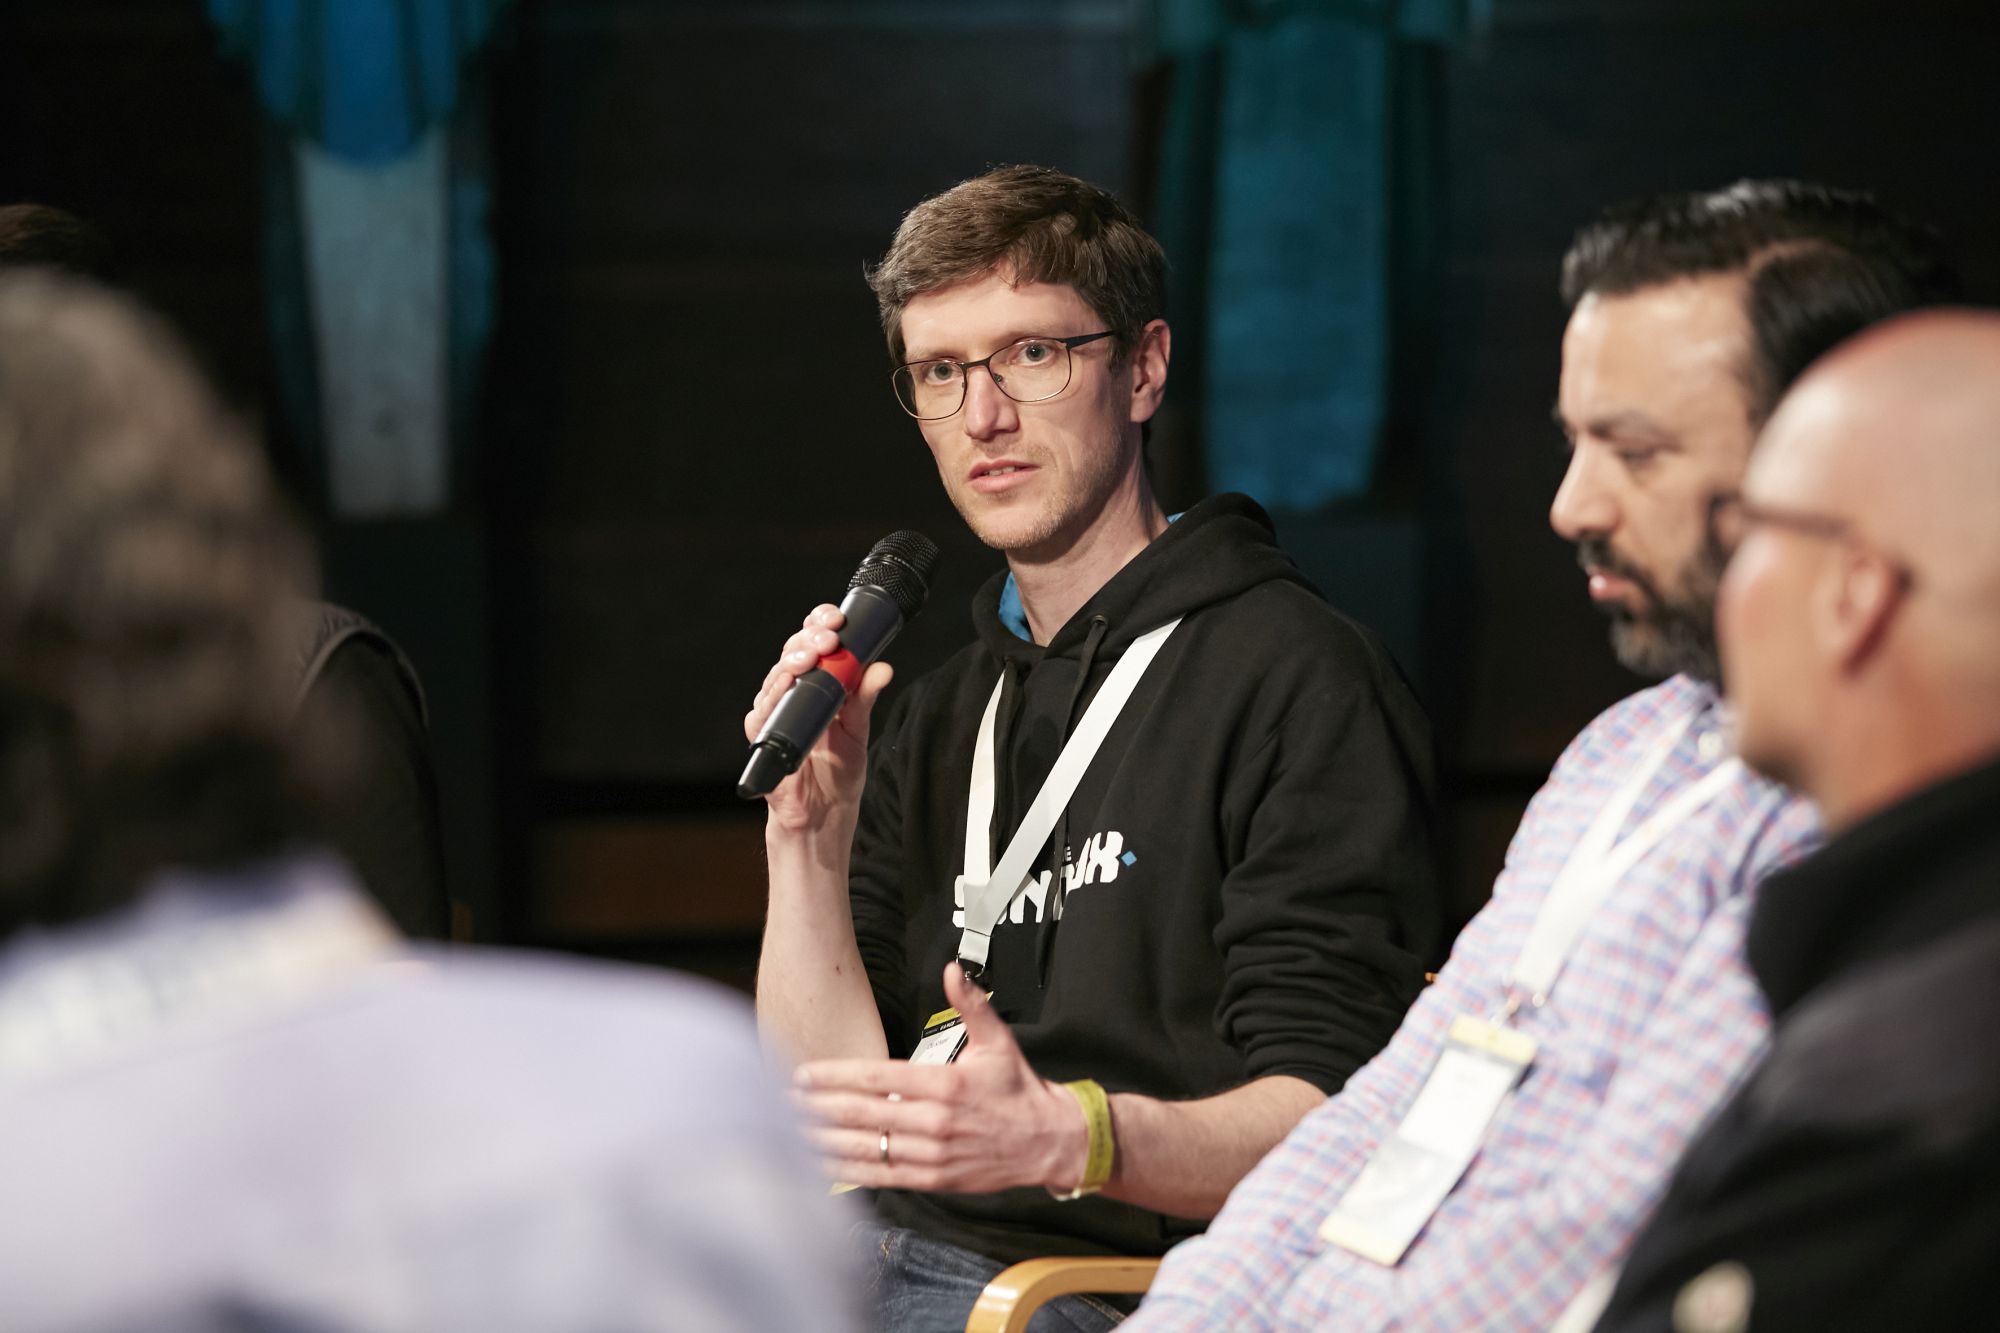 Ole Schaper, CTO of Sviper on the panel M&A in the games industry | Photo by Rolf Otzipka